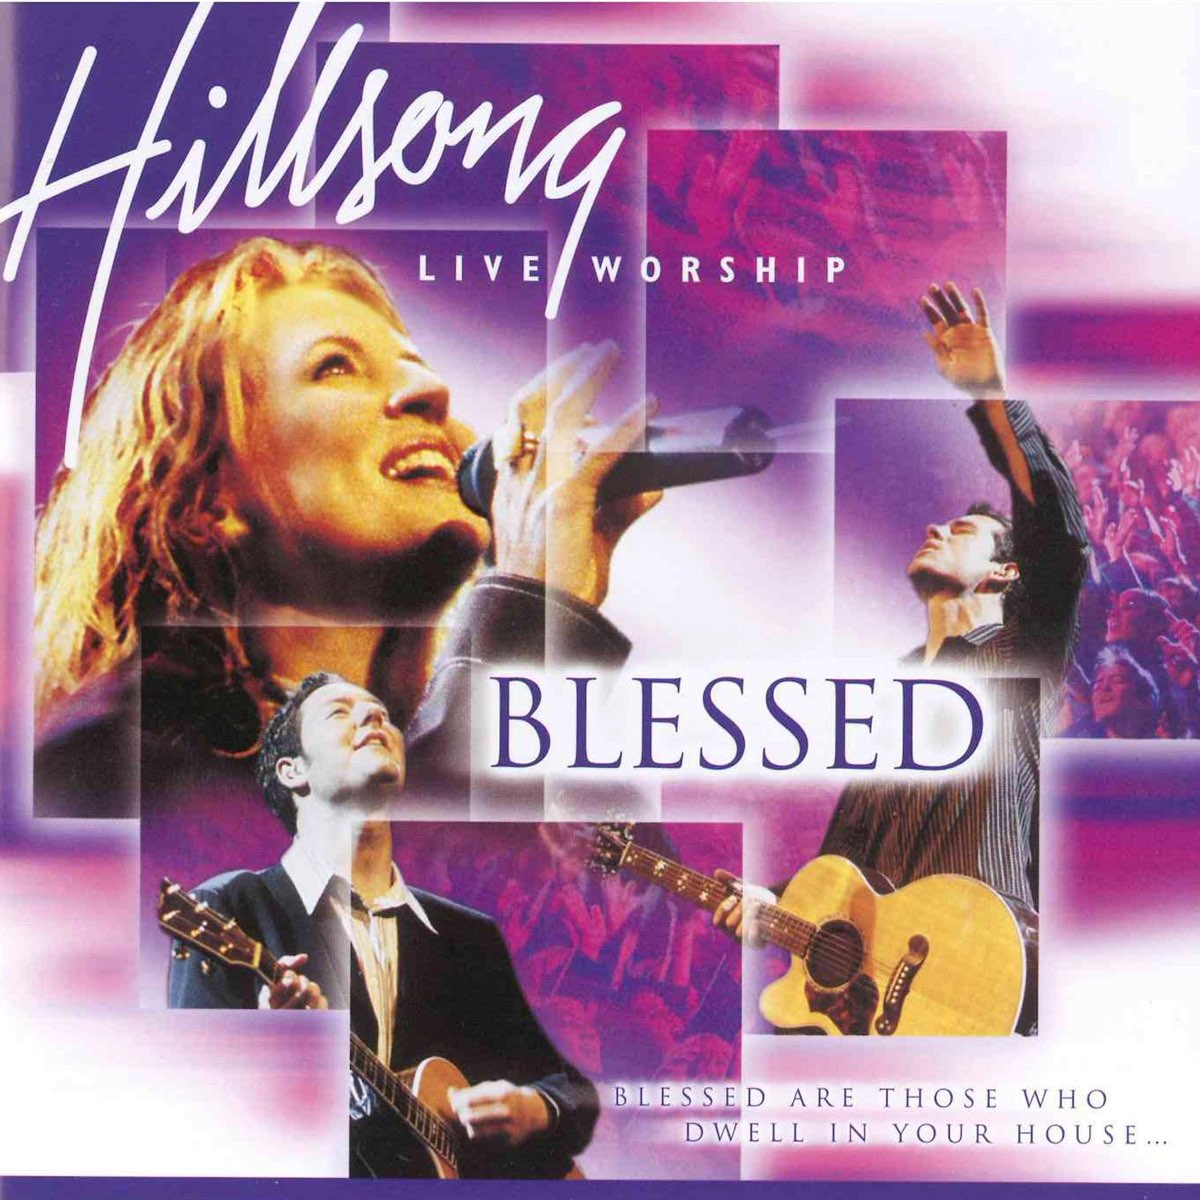 Blessed Live By Hillsong Worship On Apple Music